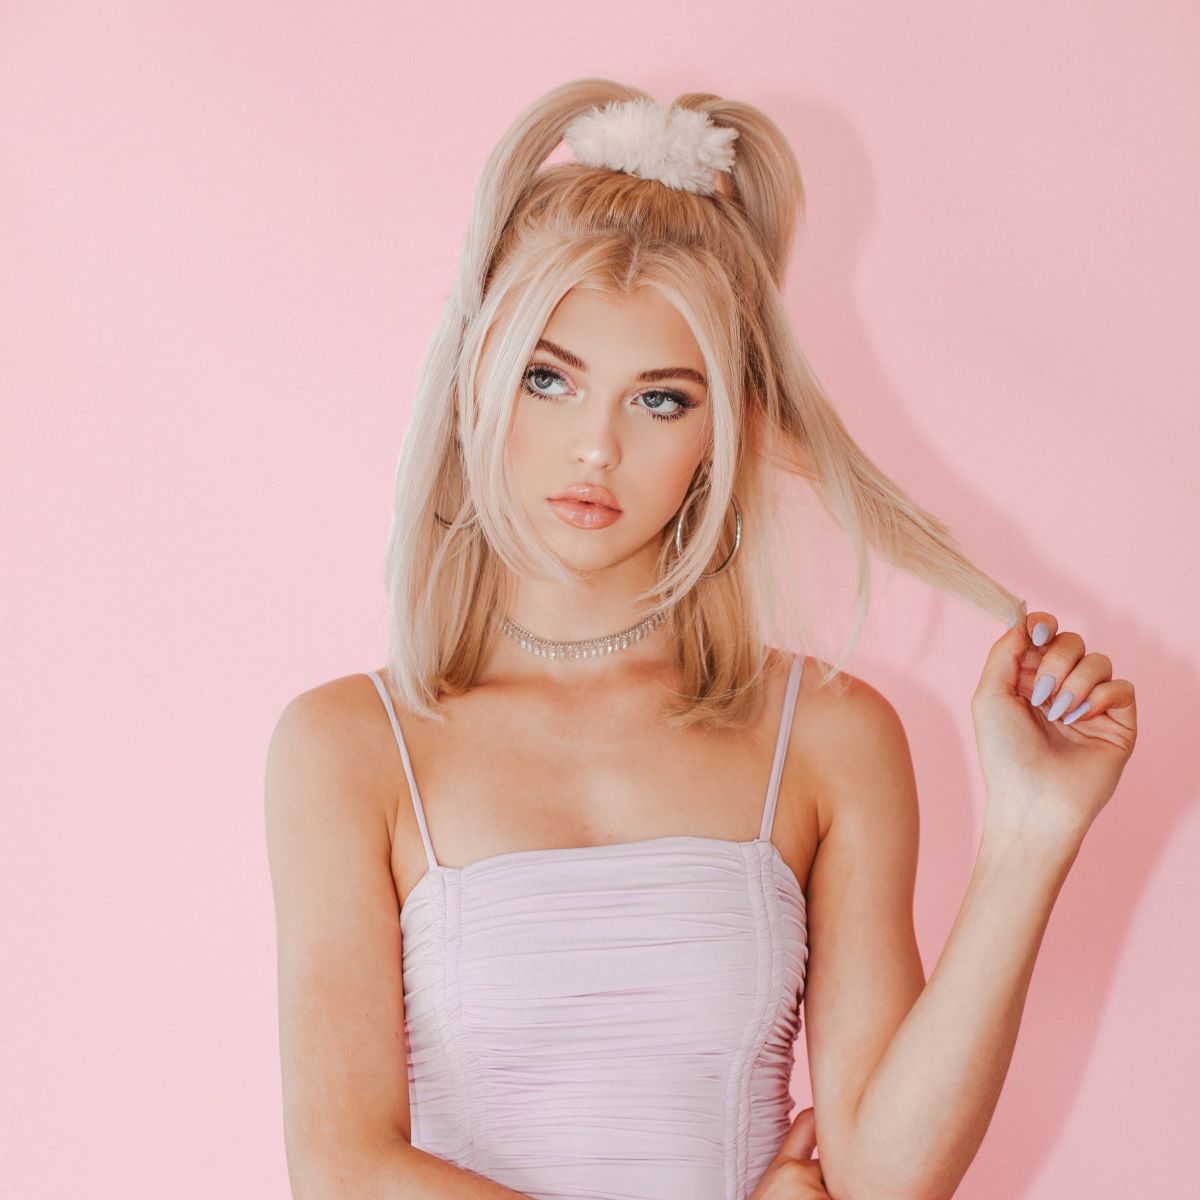 Loren Gray At A Photoshoot March 2019 – Hawtcelebs